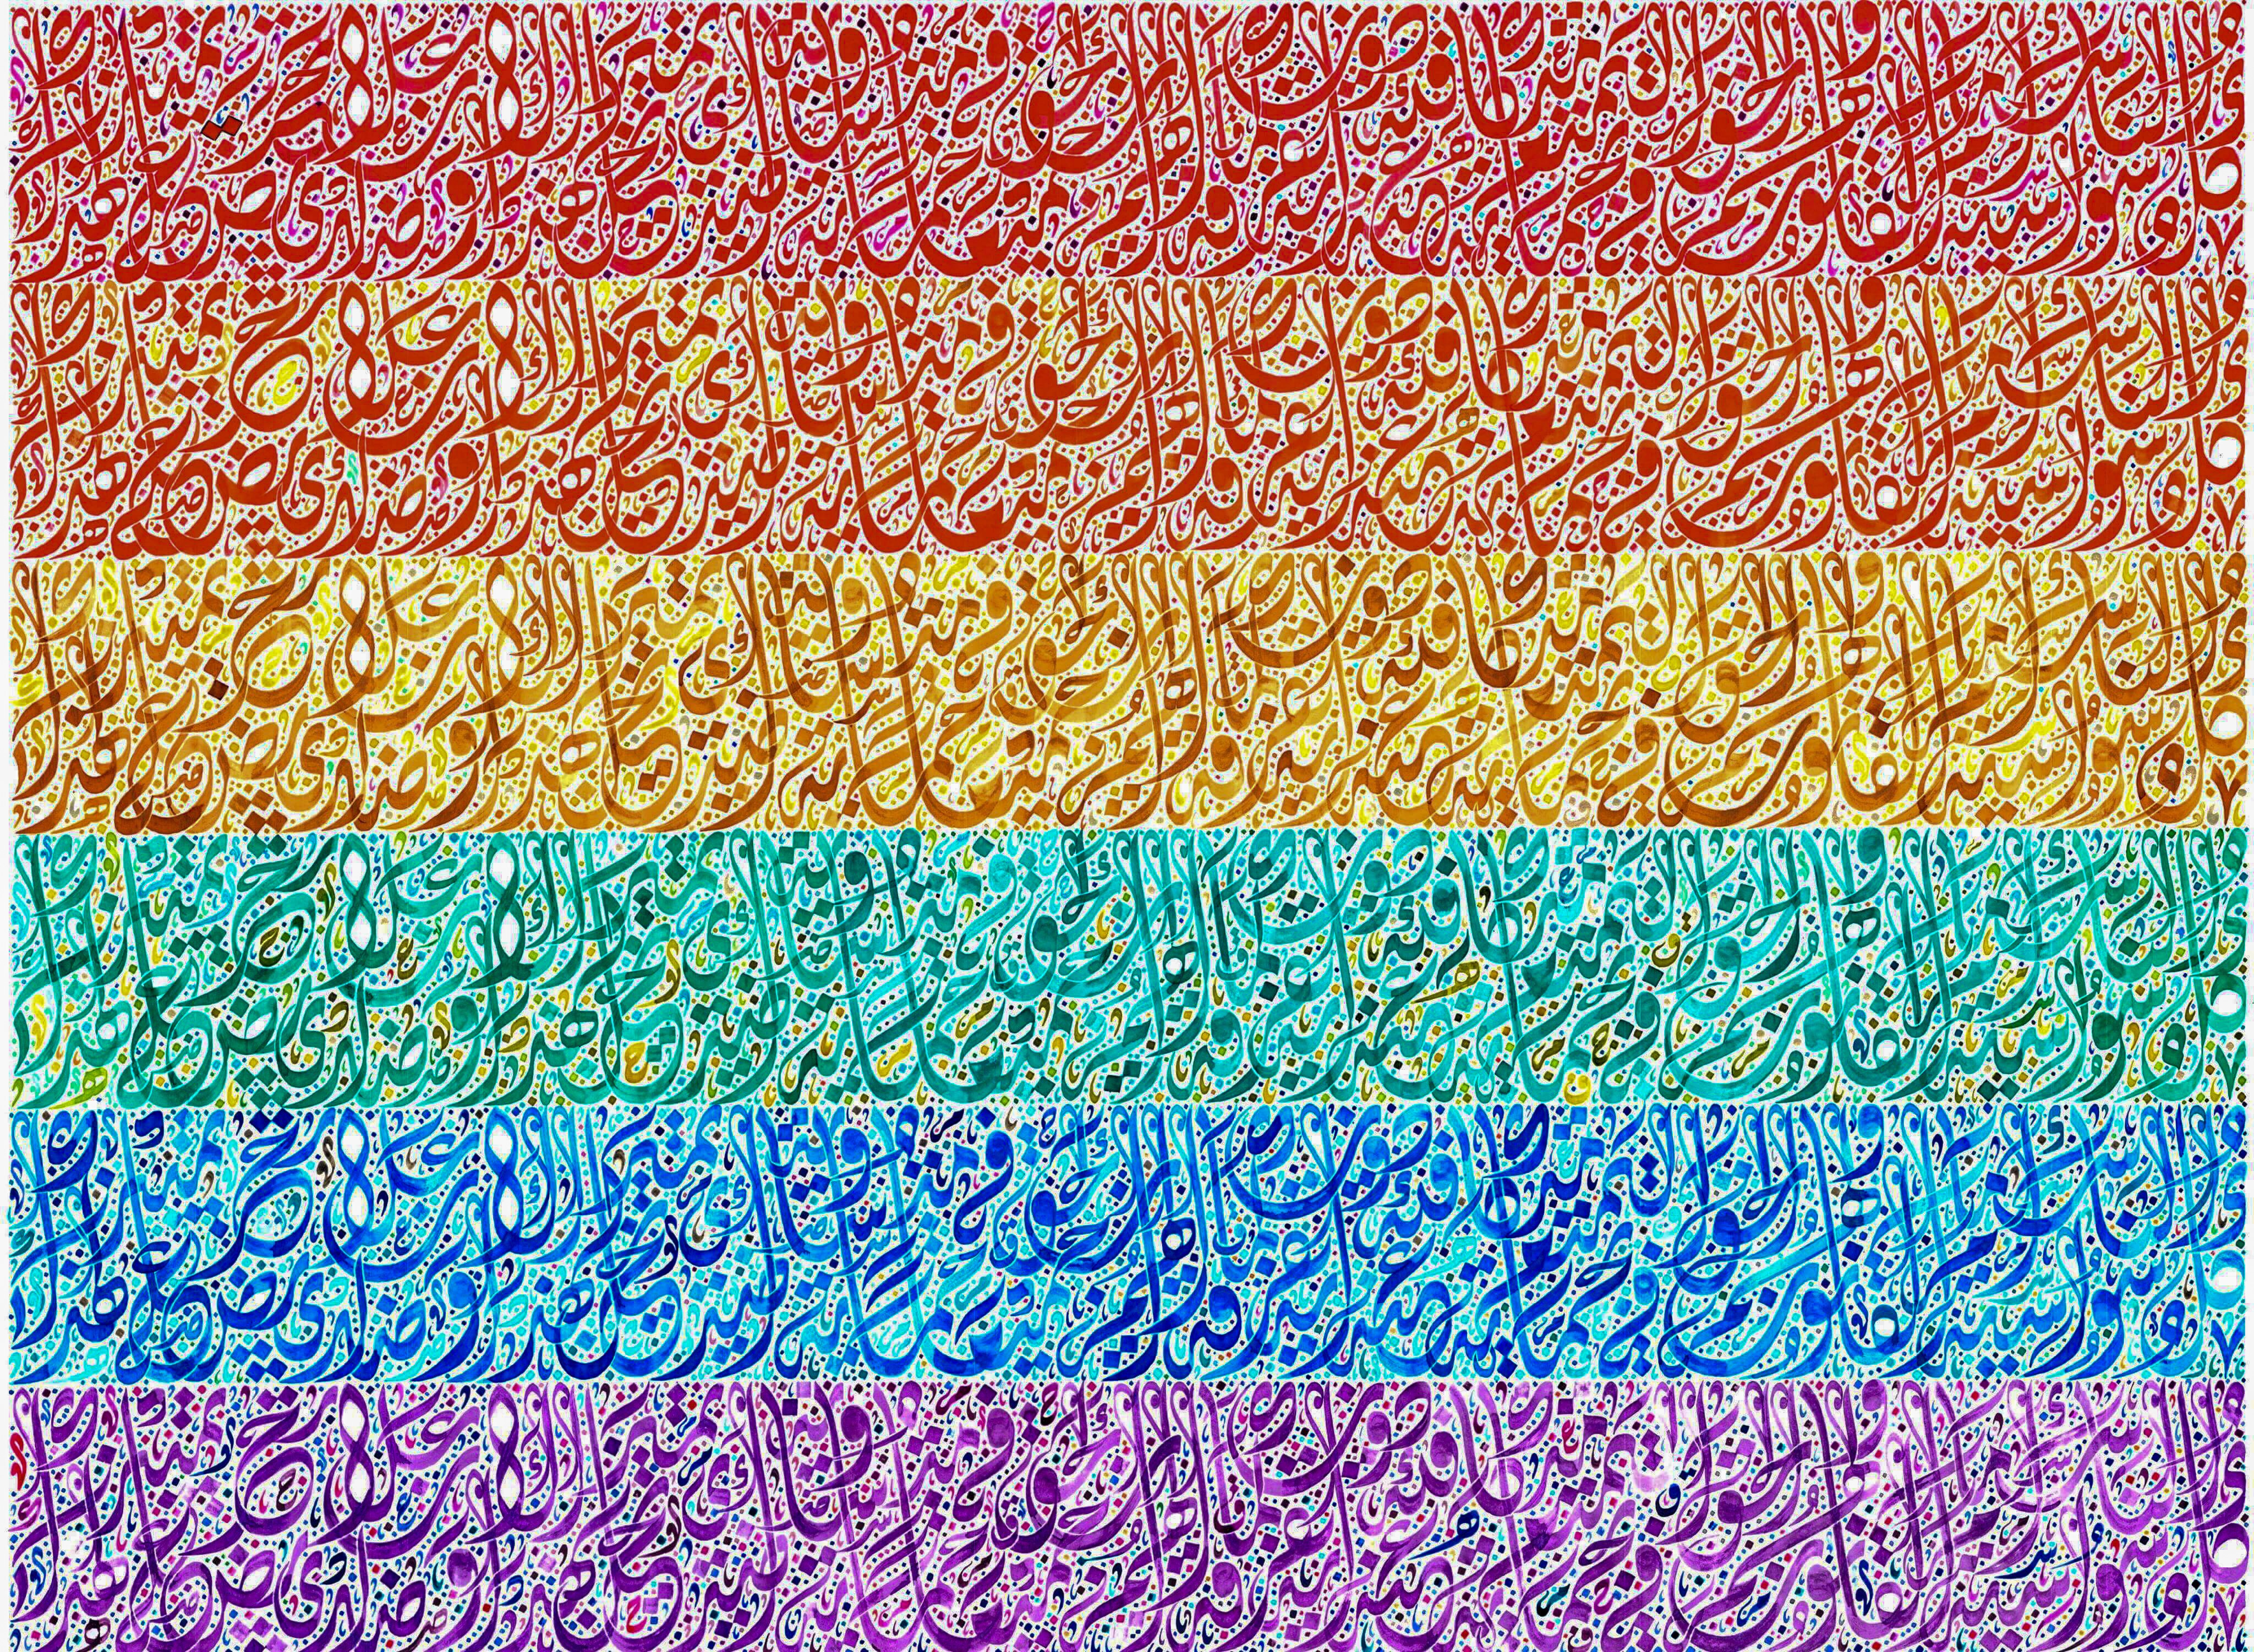 Pride Flag - Arabic Calligraphy by Everitte Barbee